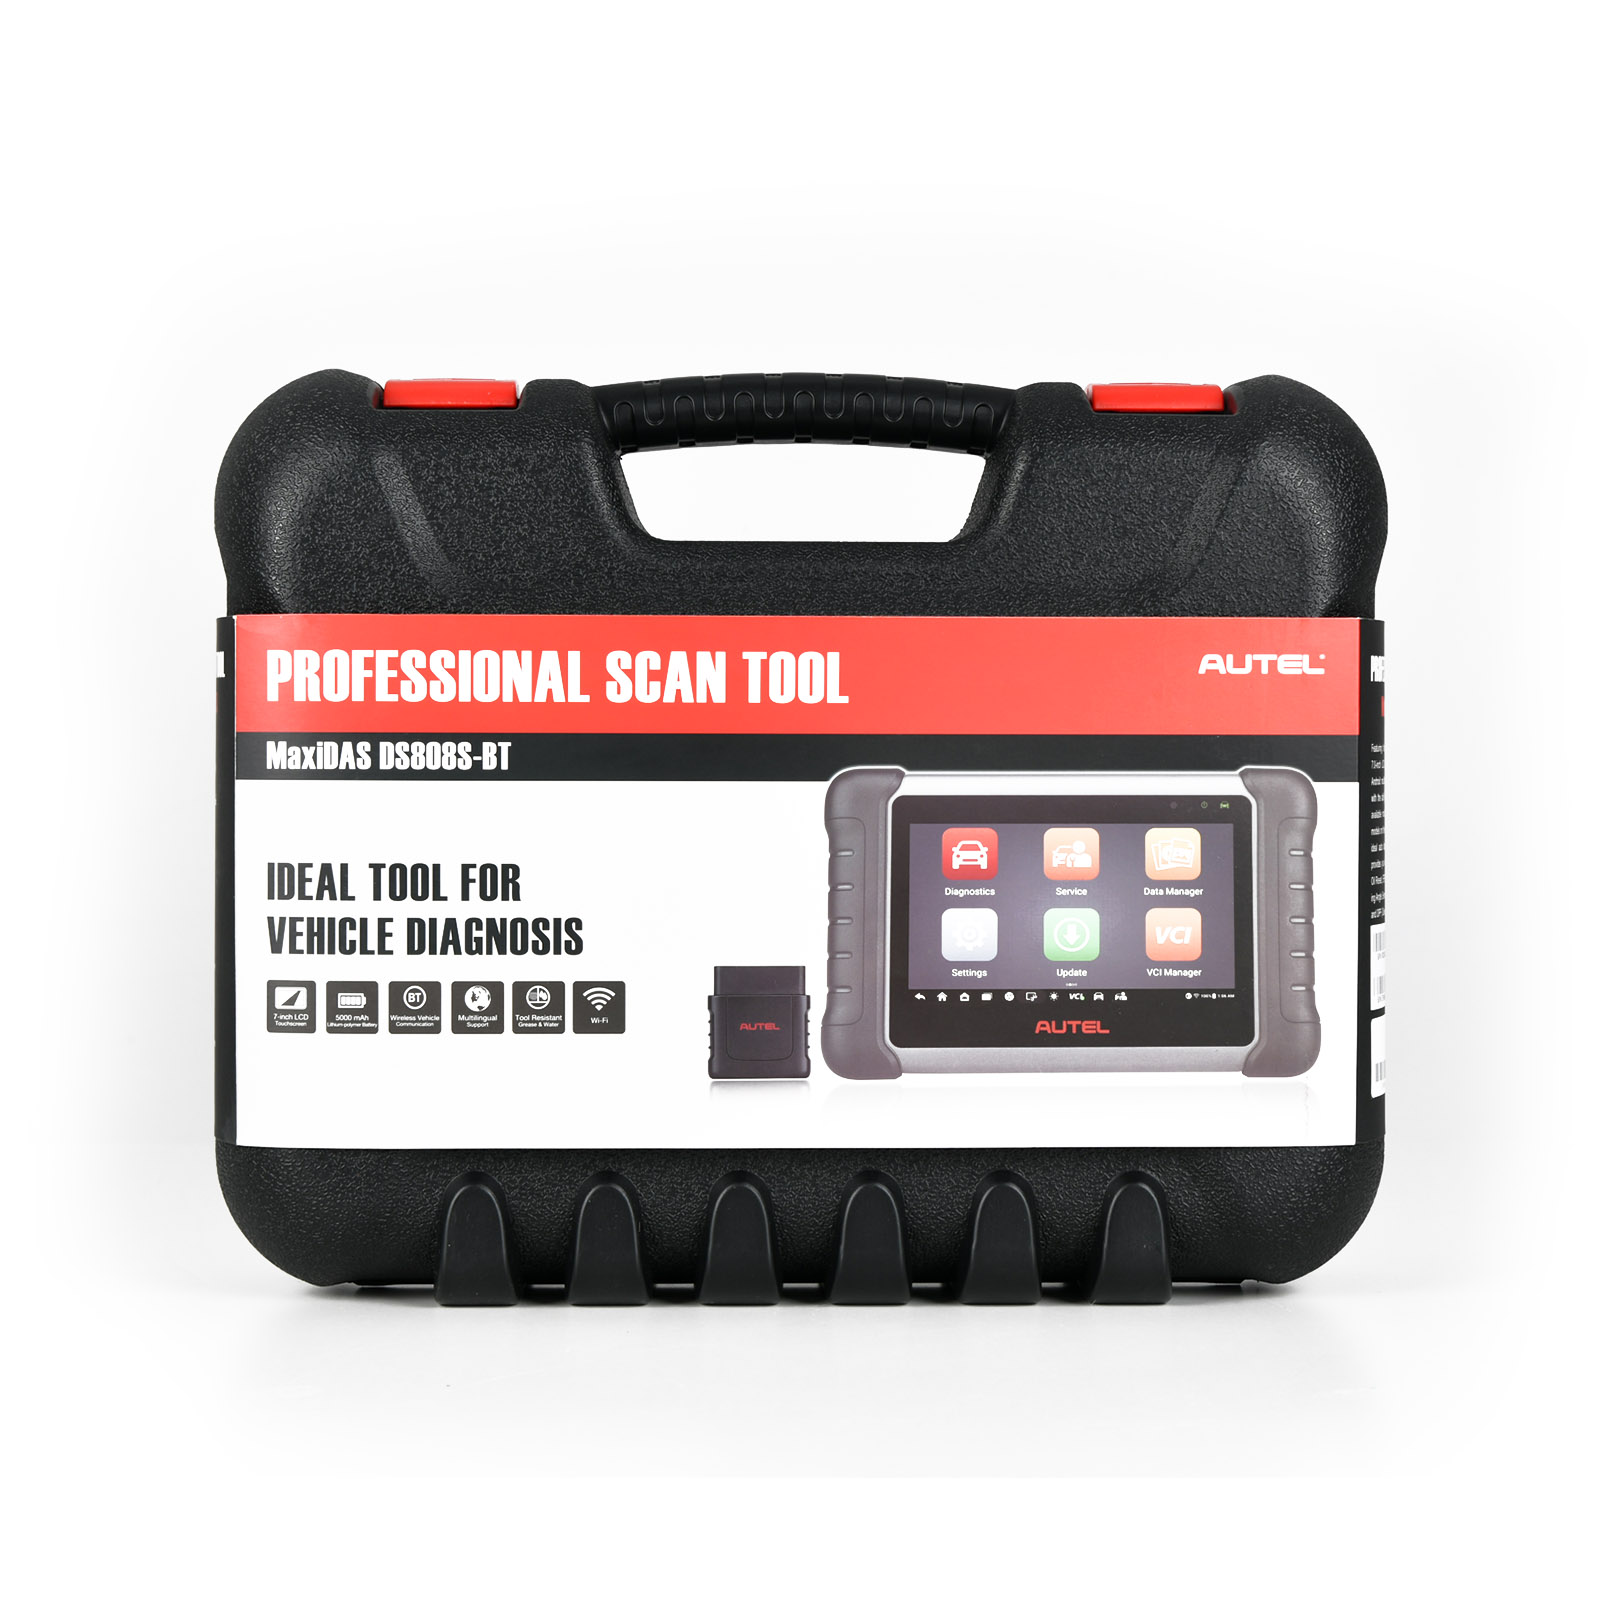 Autel Scanner Maxisys MS906 Pro Auto Diagnostic Scan Tool With Advanced ECU  Coding, Adaptations,with MV108,BT506